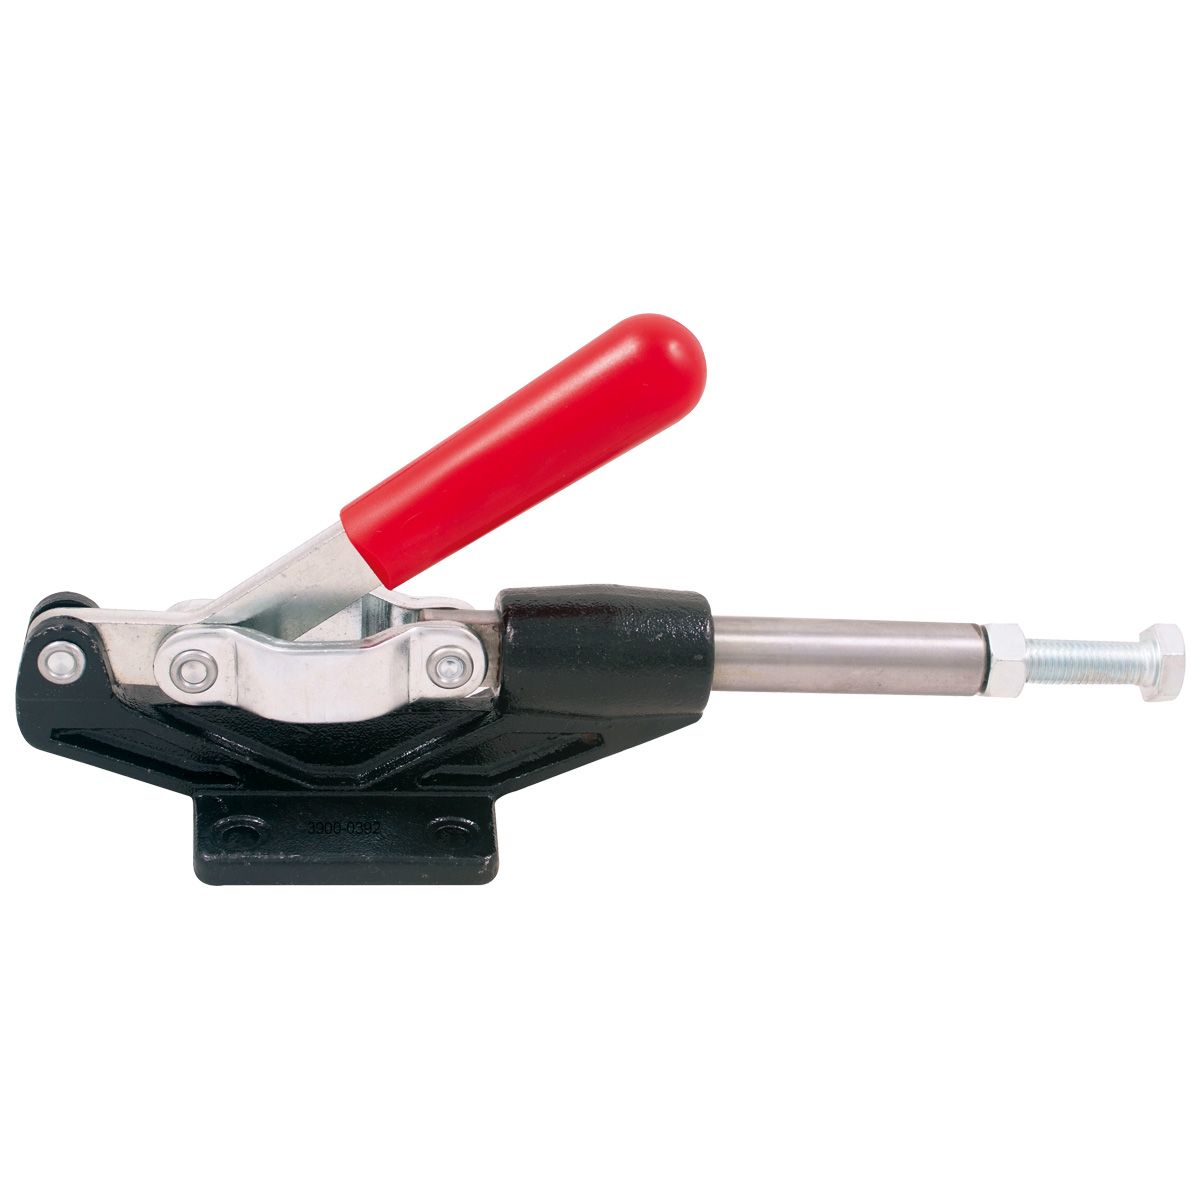 PUSH & PULL CLAMP WITH 90 DEGREE HANDLE & 1500 LBS HOLDING CAPACITY (3900-0393)